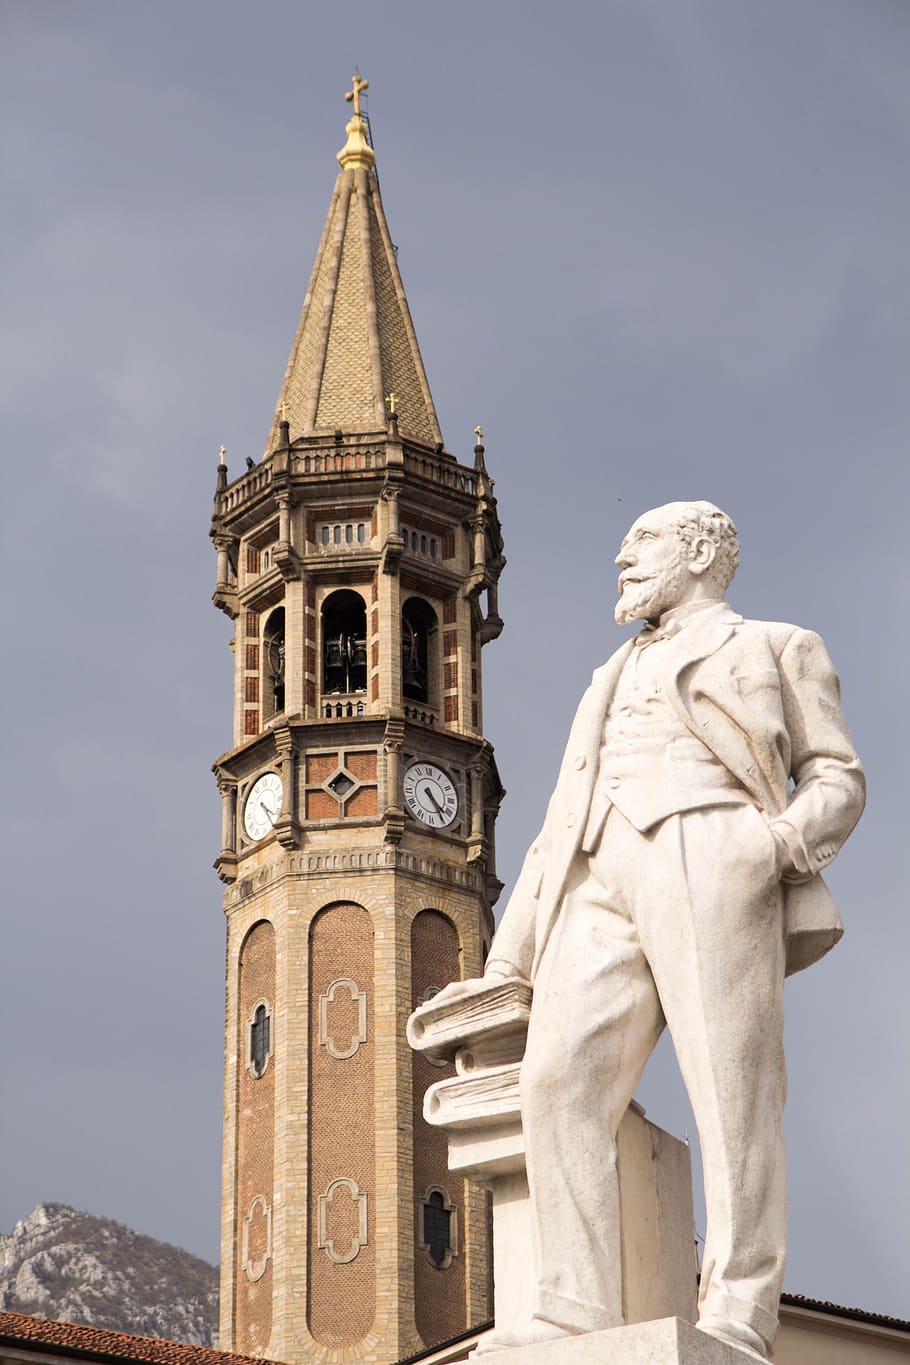 lecco, lake, italy, sky, thunderstorm, torre, watch, statue, sculpture, architecture